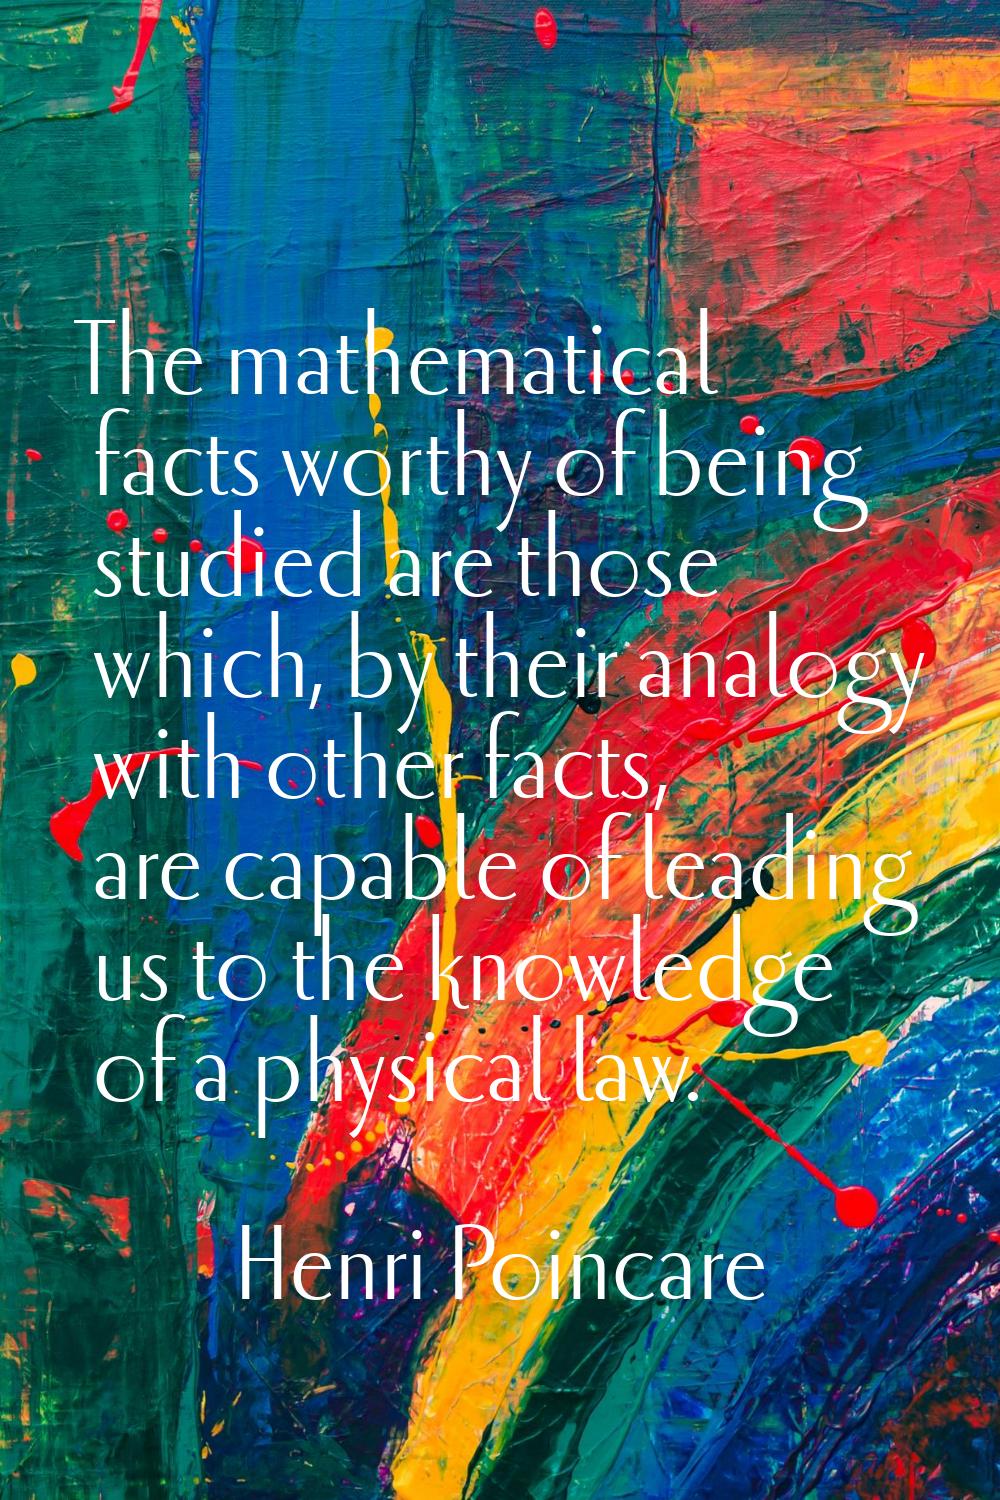 The mathematical facts worthy of being studied are those which, by their analogy with other facts, 